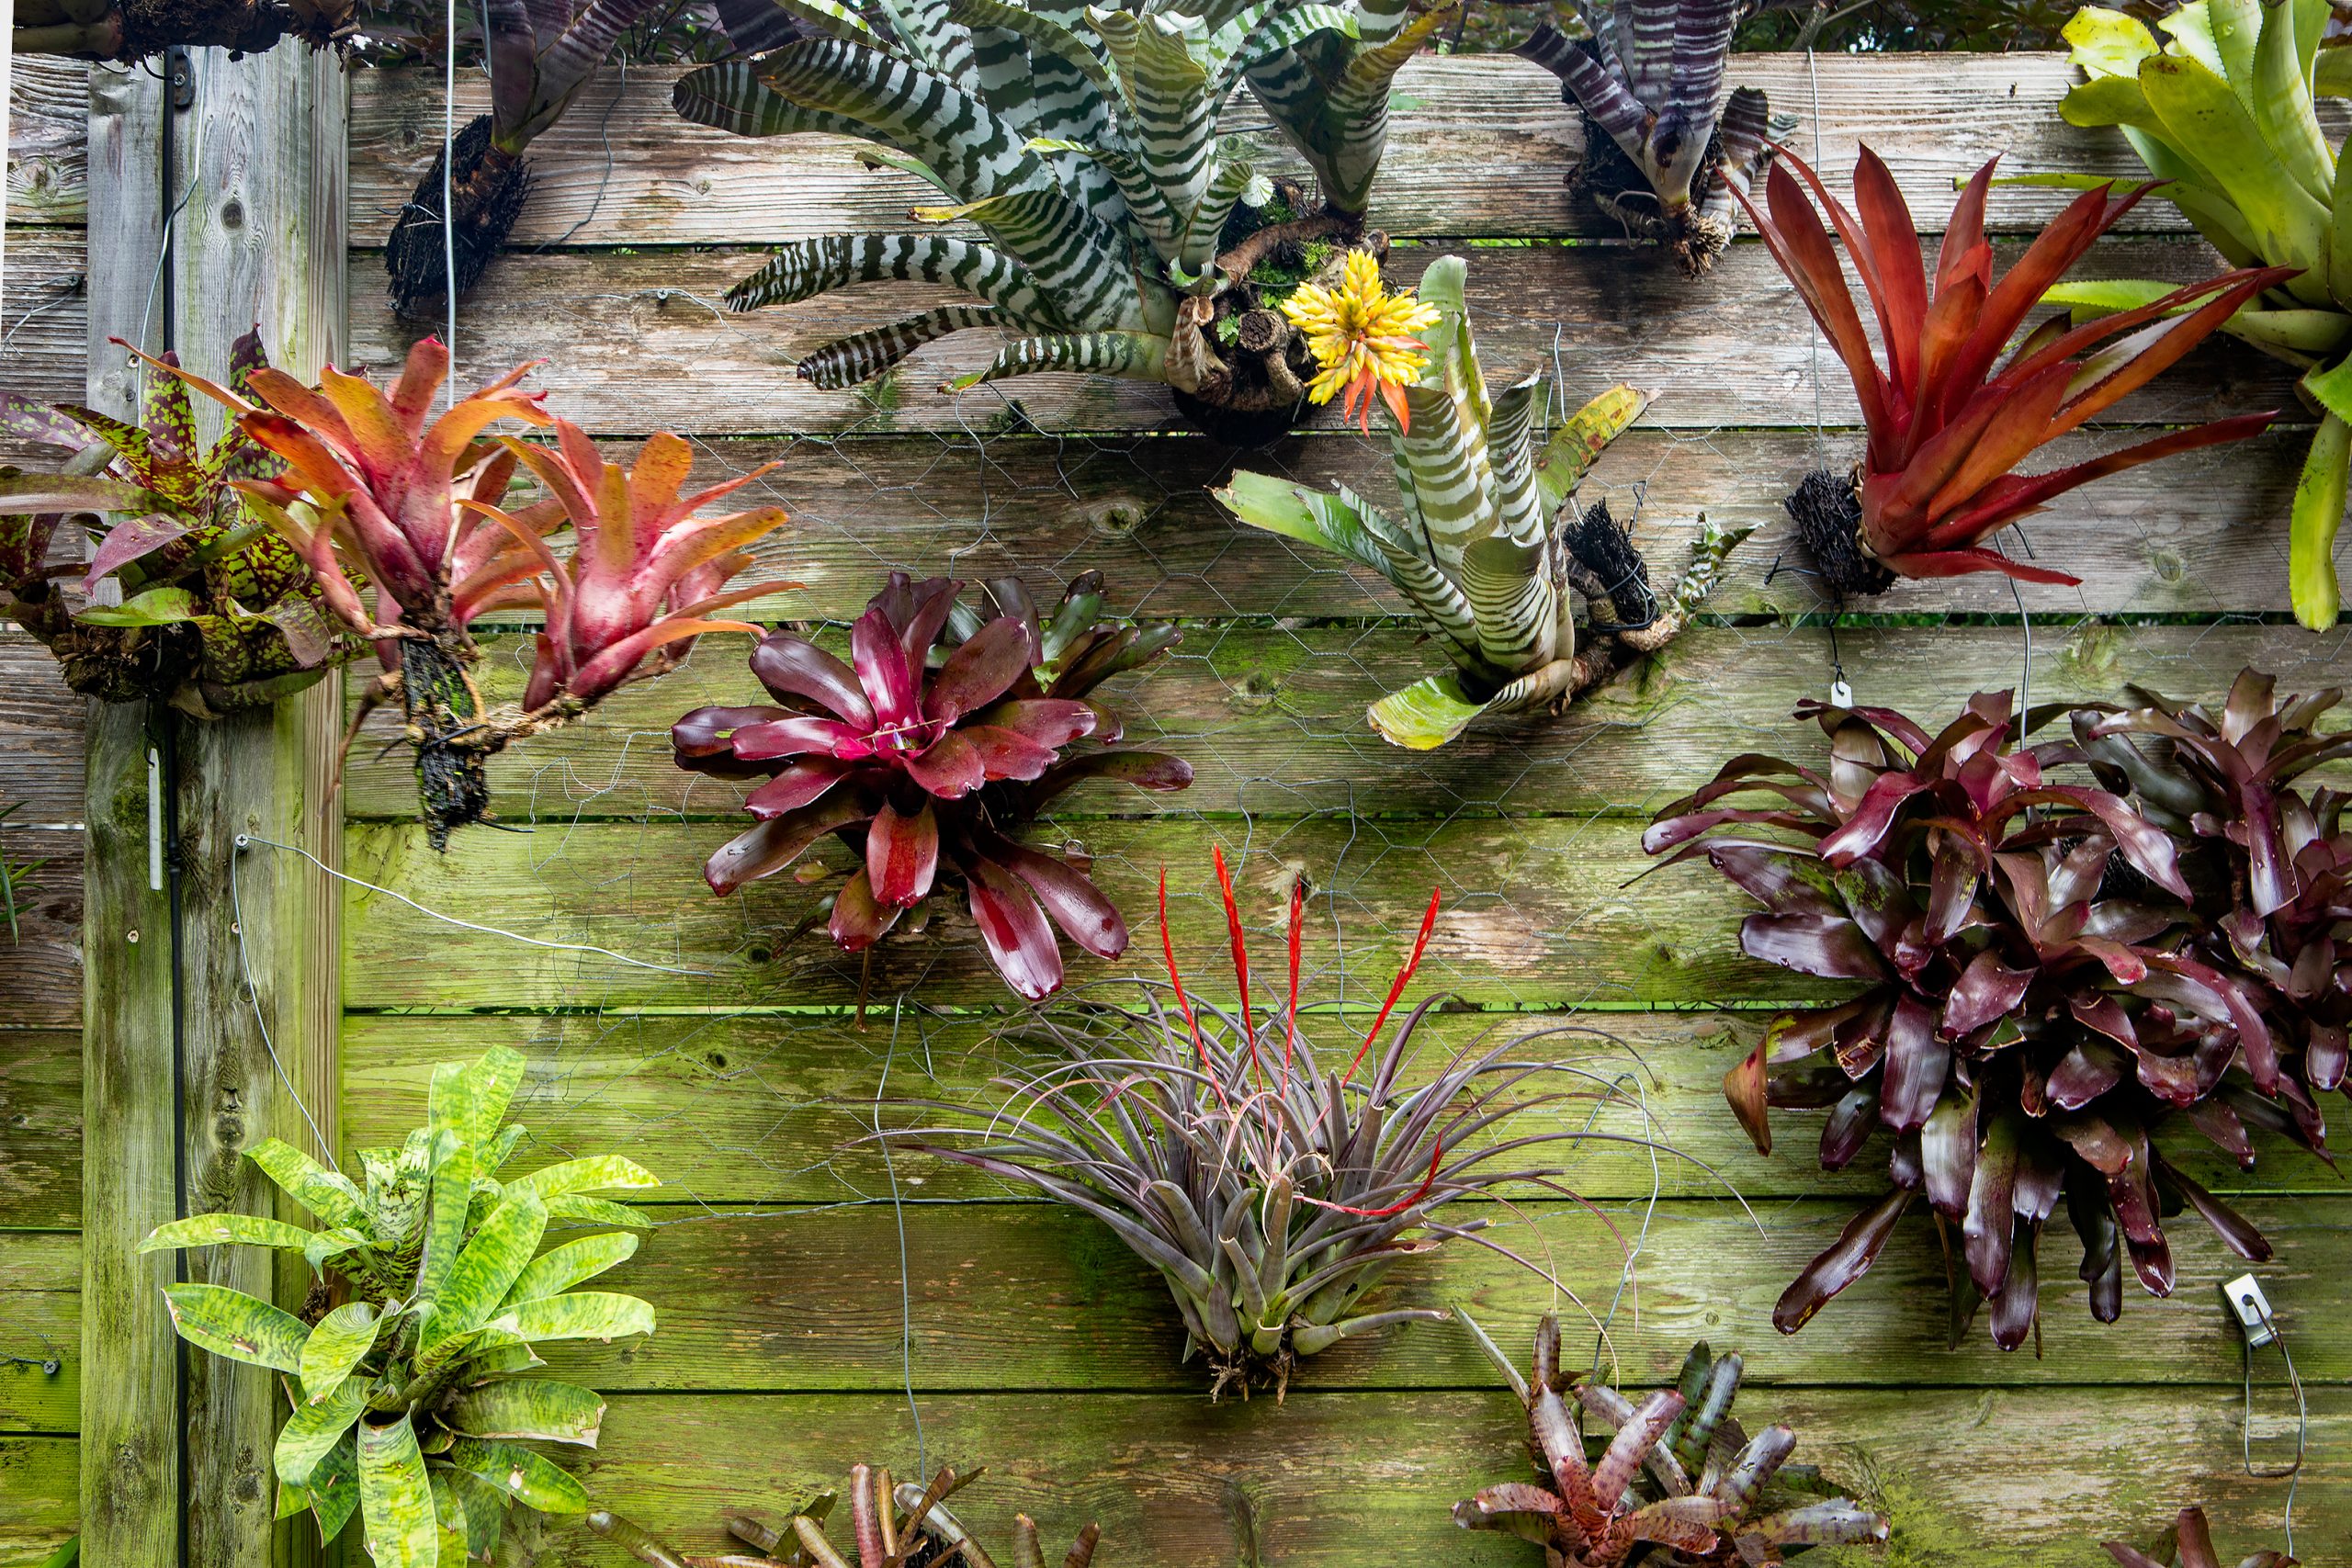  Bromeliads are the dominant plant in the garden. Native largely to tropical regions of North and South America, they are the primary reason for Pat’s zonal denial. Bromeliads are a diverse species of plant, with 50 genera and thousands of cultivars. A portion of the bromeliad-covered cedar fence on the north side of the lower garden creates a vertical plant gallery.